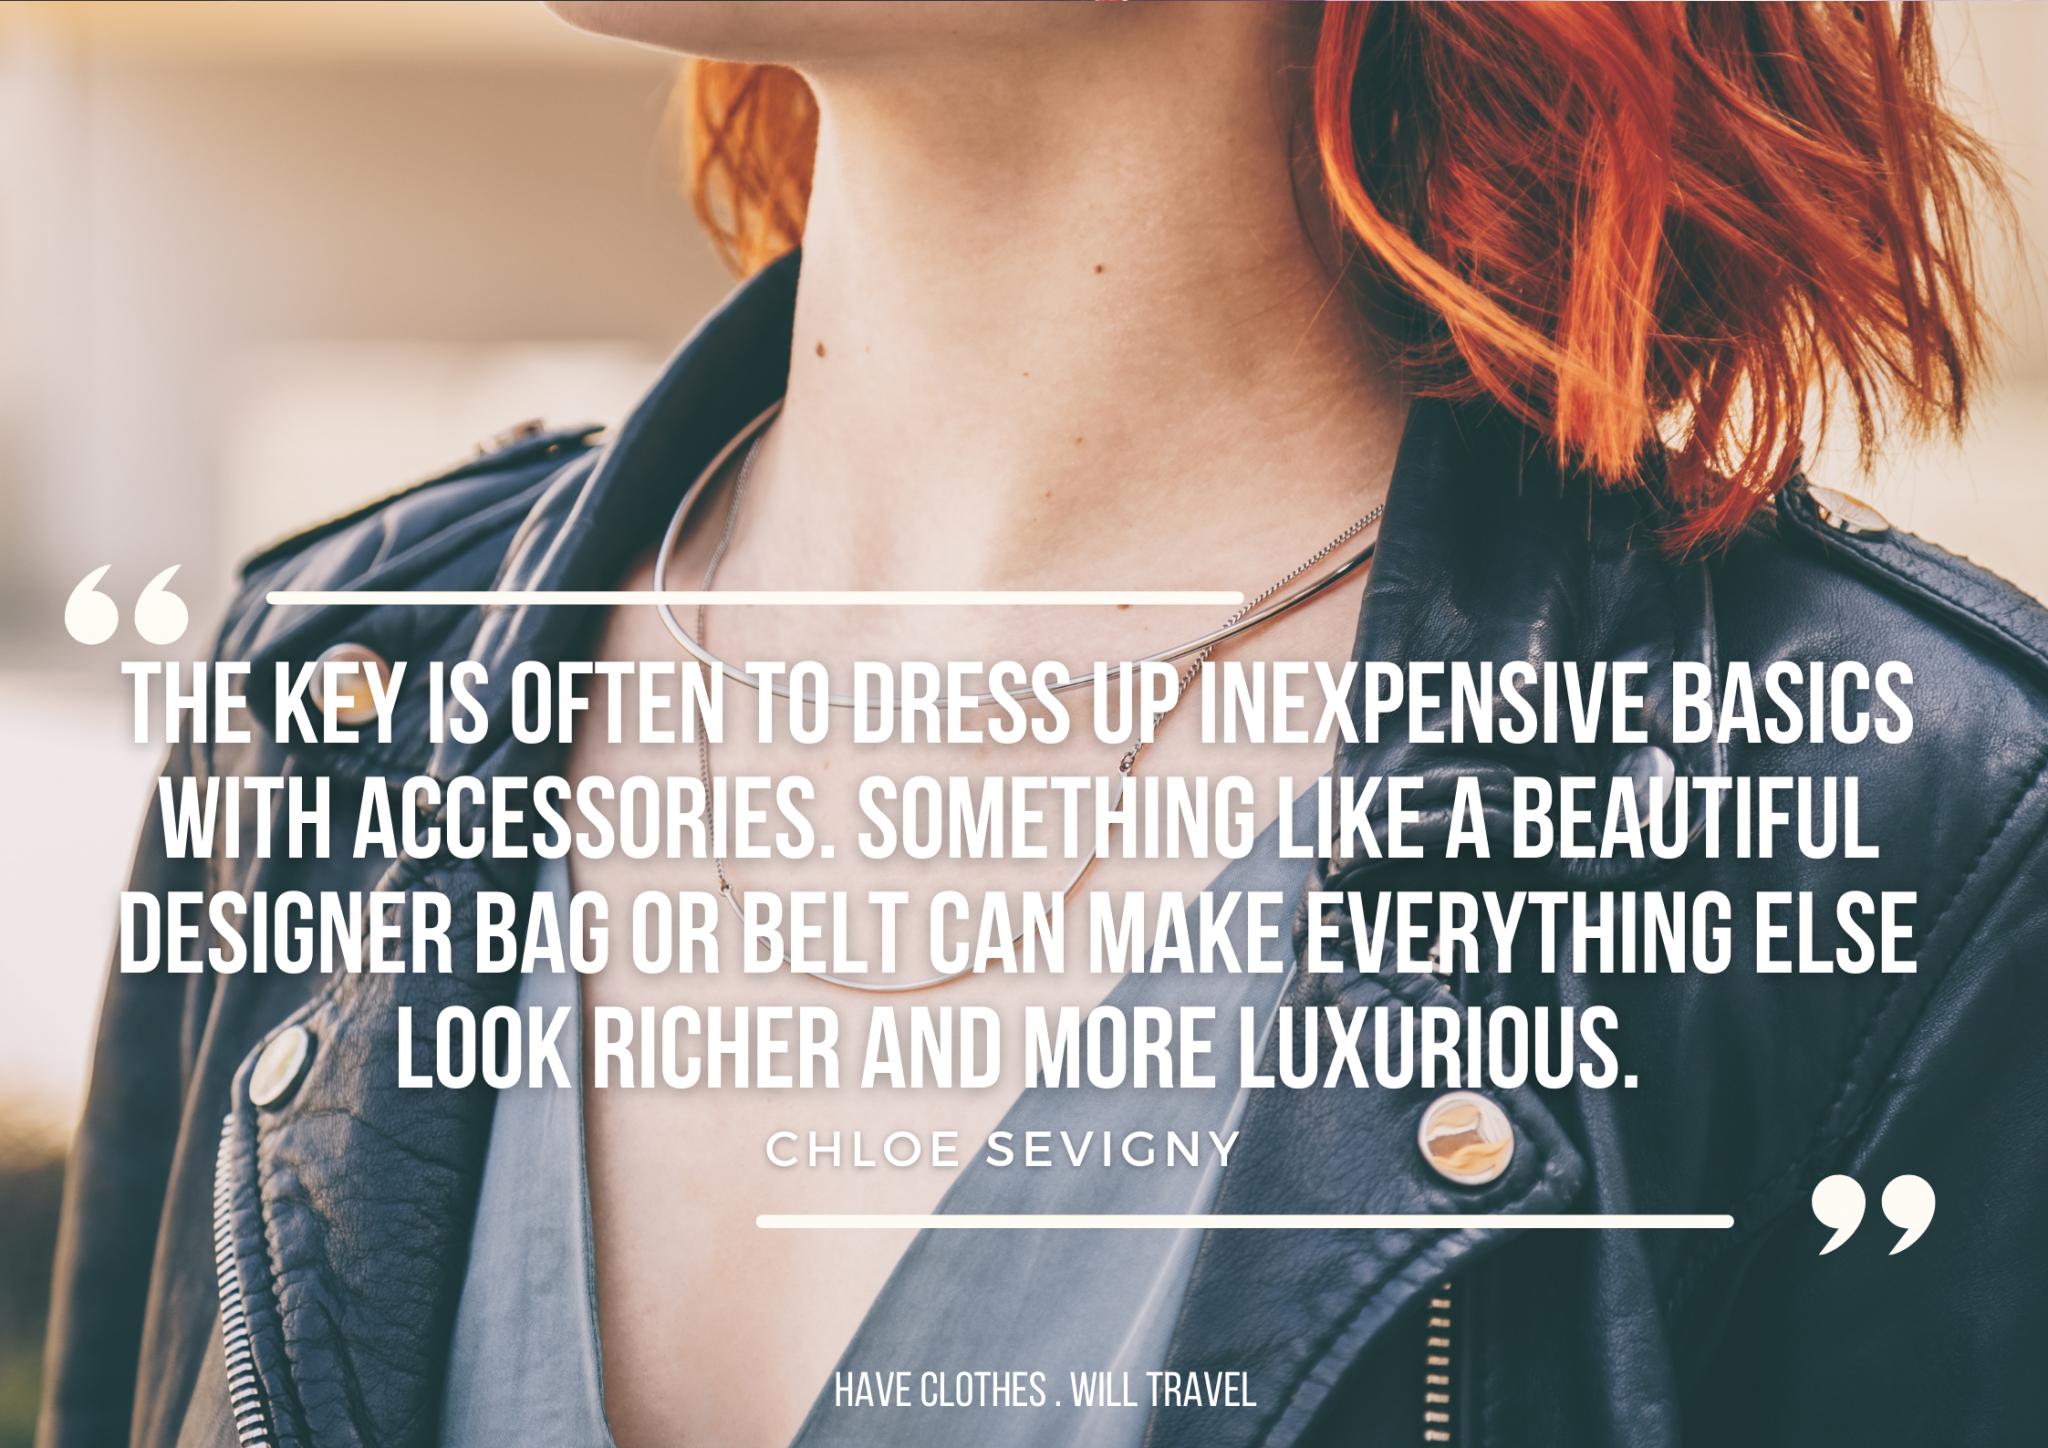 An image of a woman with short red hair, wearing a gray t-shirt and black leather jacket. The image is cropped to show just her neck and upper chest area. White text across the image says, "It's not what you spend but how you wear it that counts. The key is often to dress up inexpensive basics with accessories. Something like a beautiful designer bag or belt can make everything else look richer and more luxurious. - Chloe Sevigny"